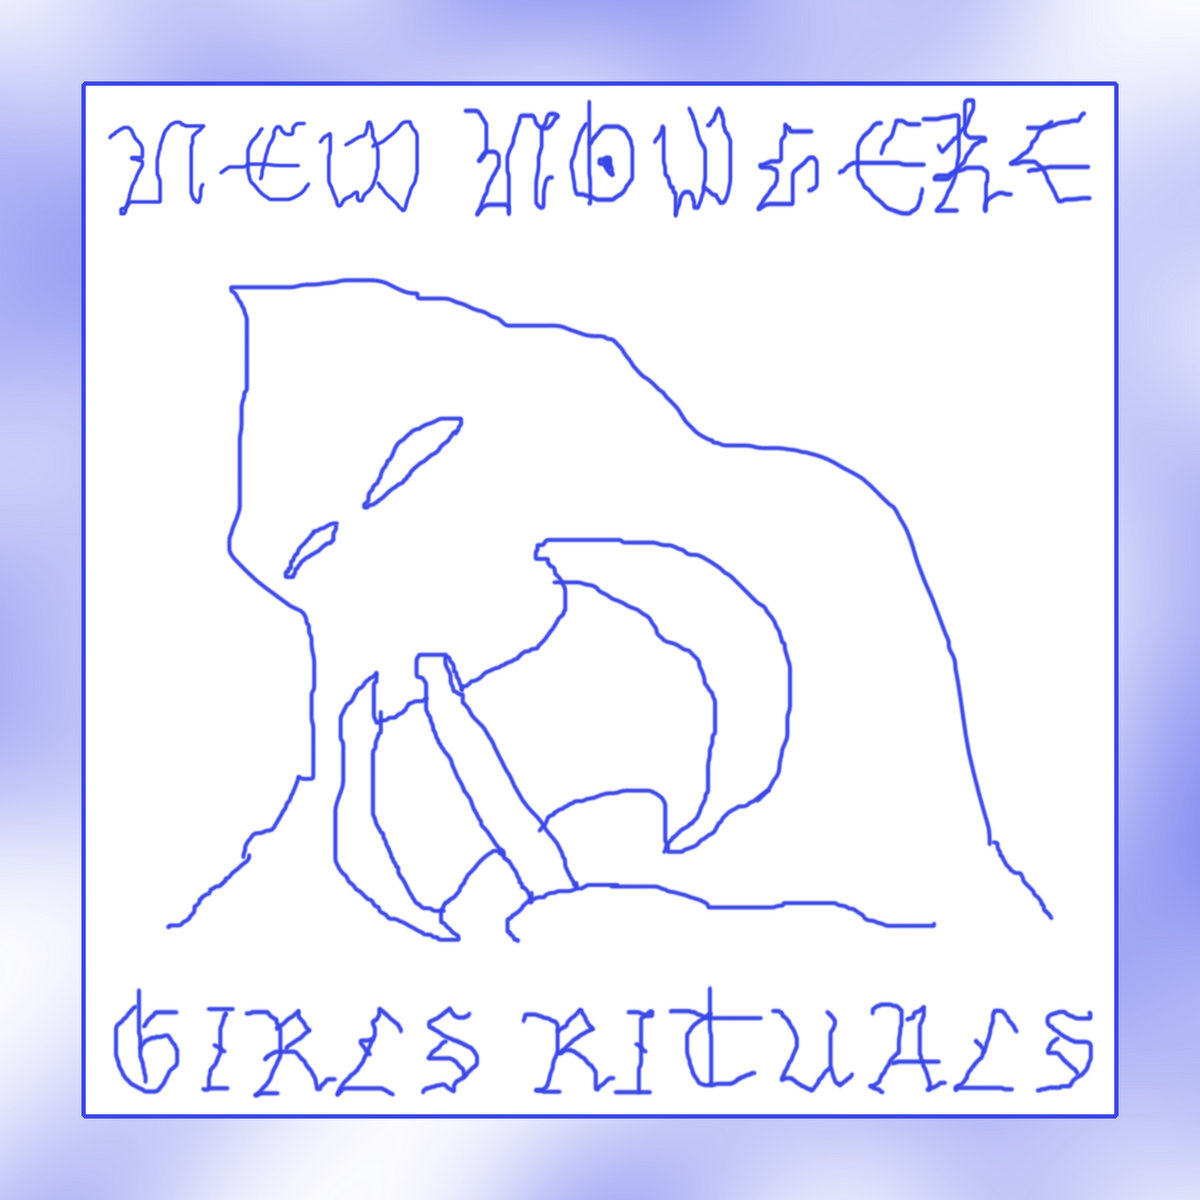 THE ALBUM COVER OF TOMATOWORM BY GIRLS RITUALS.